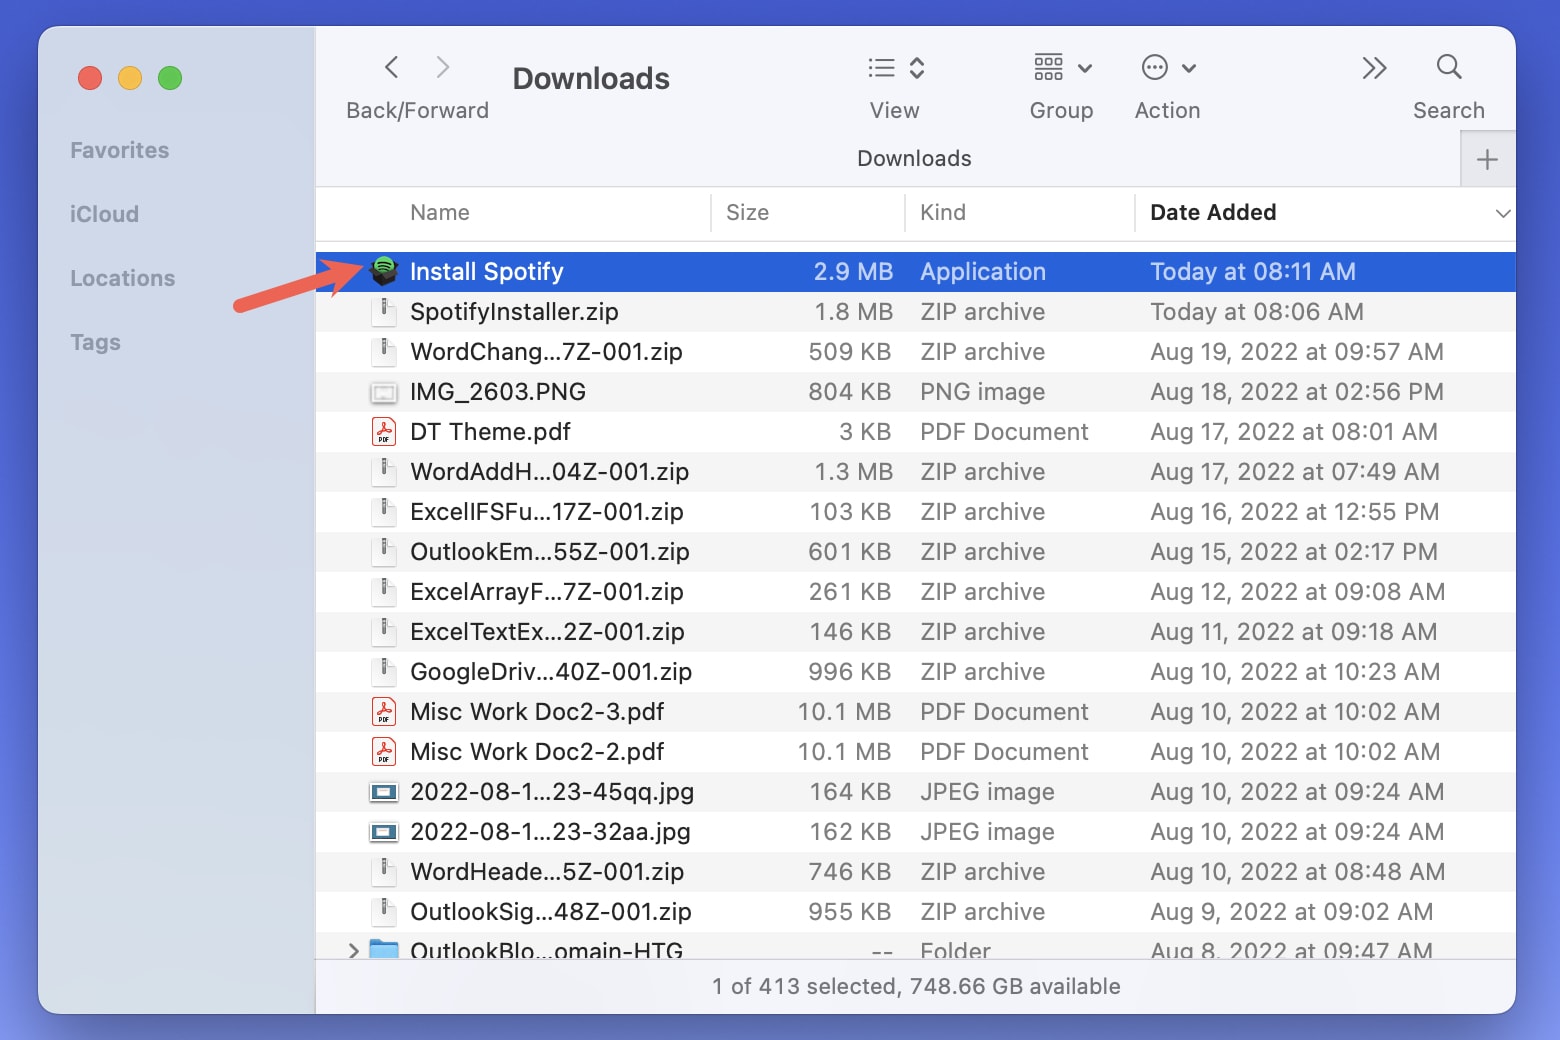 Install Spotify file from the ZIP file.